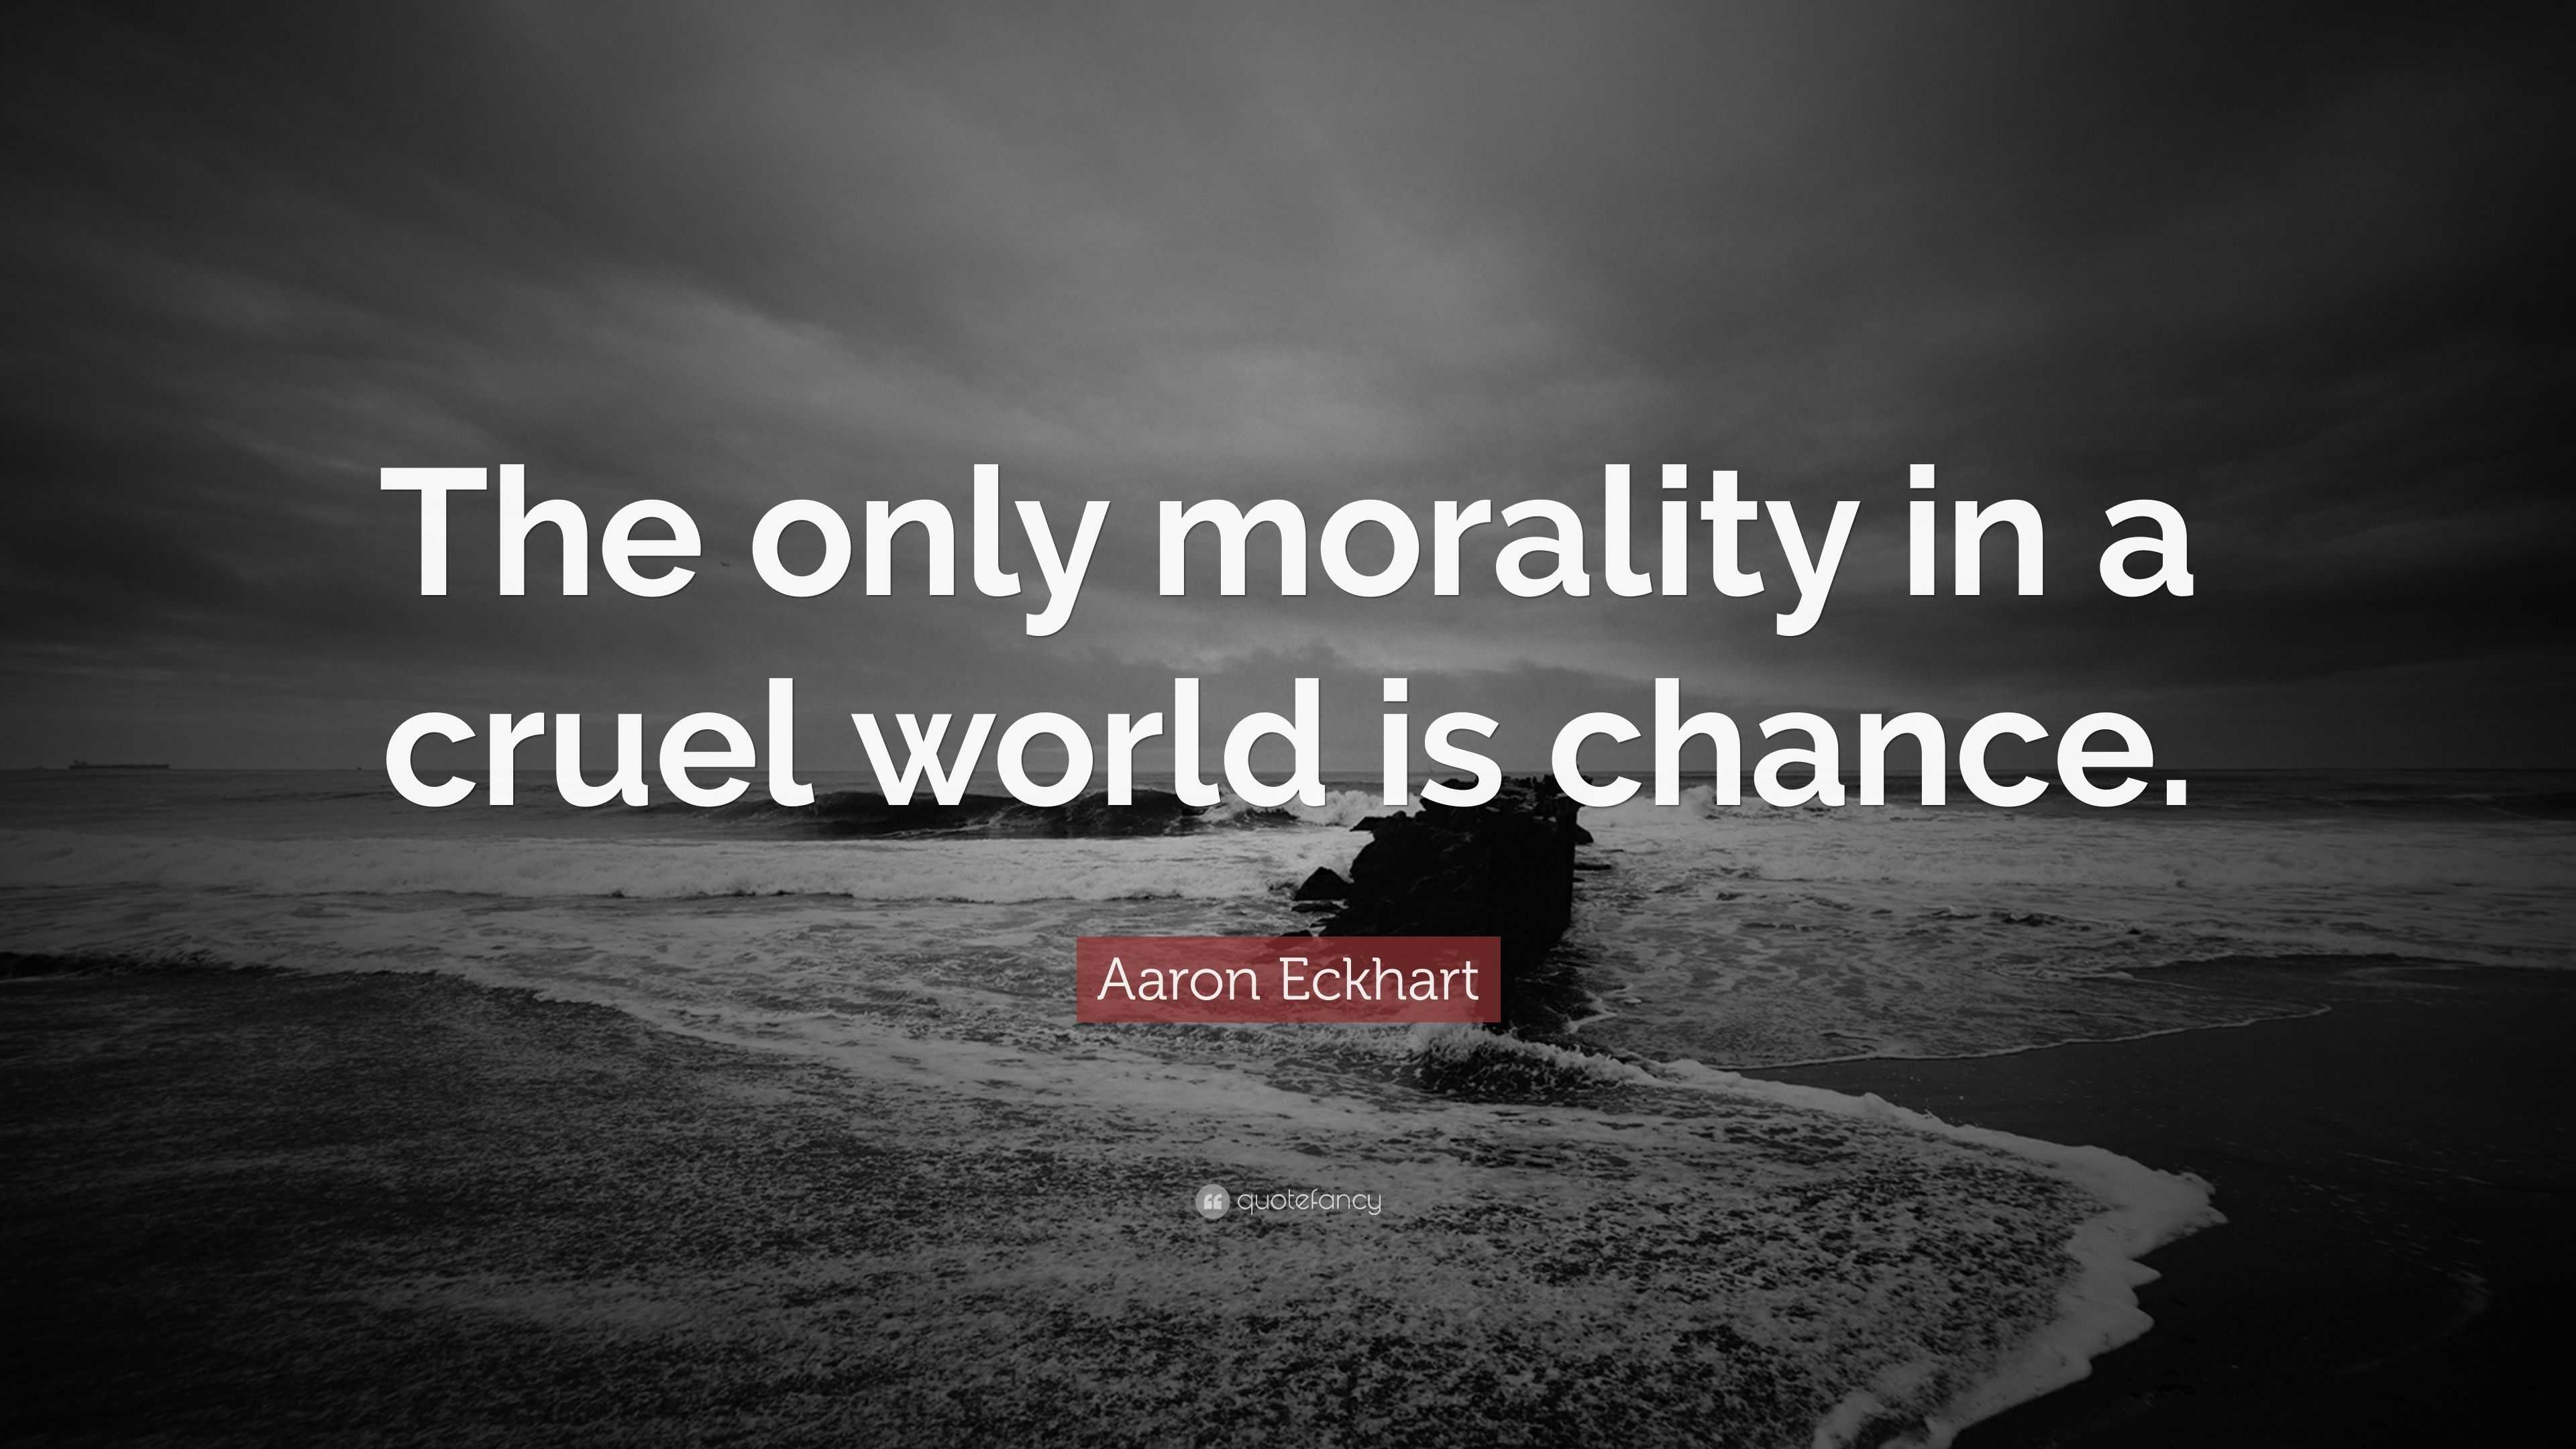 Aaron Eckhart Quote “The only morality in a cruel world is chance.”